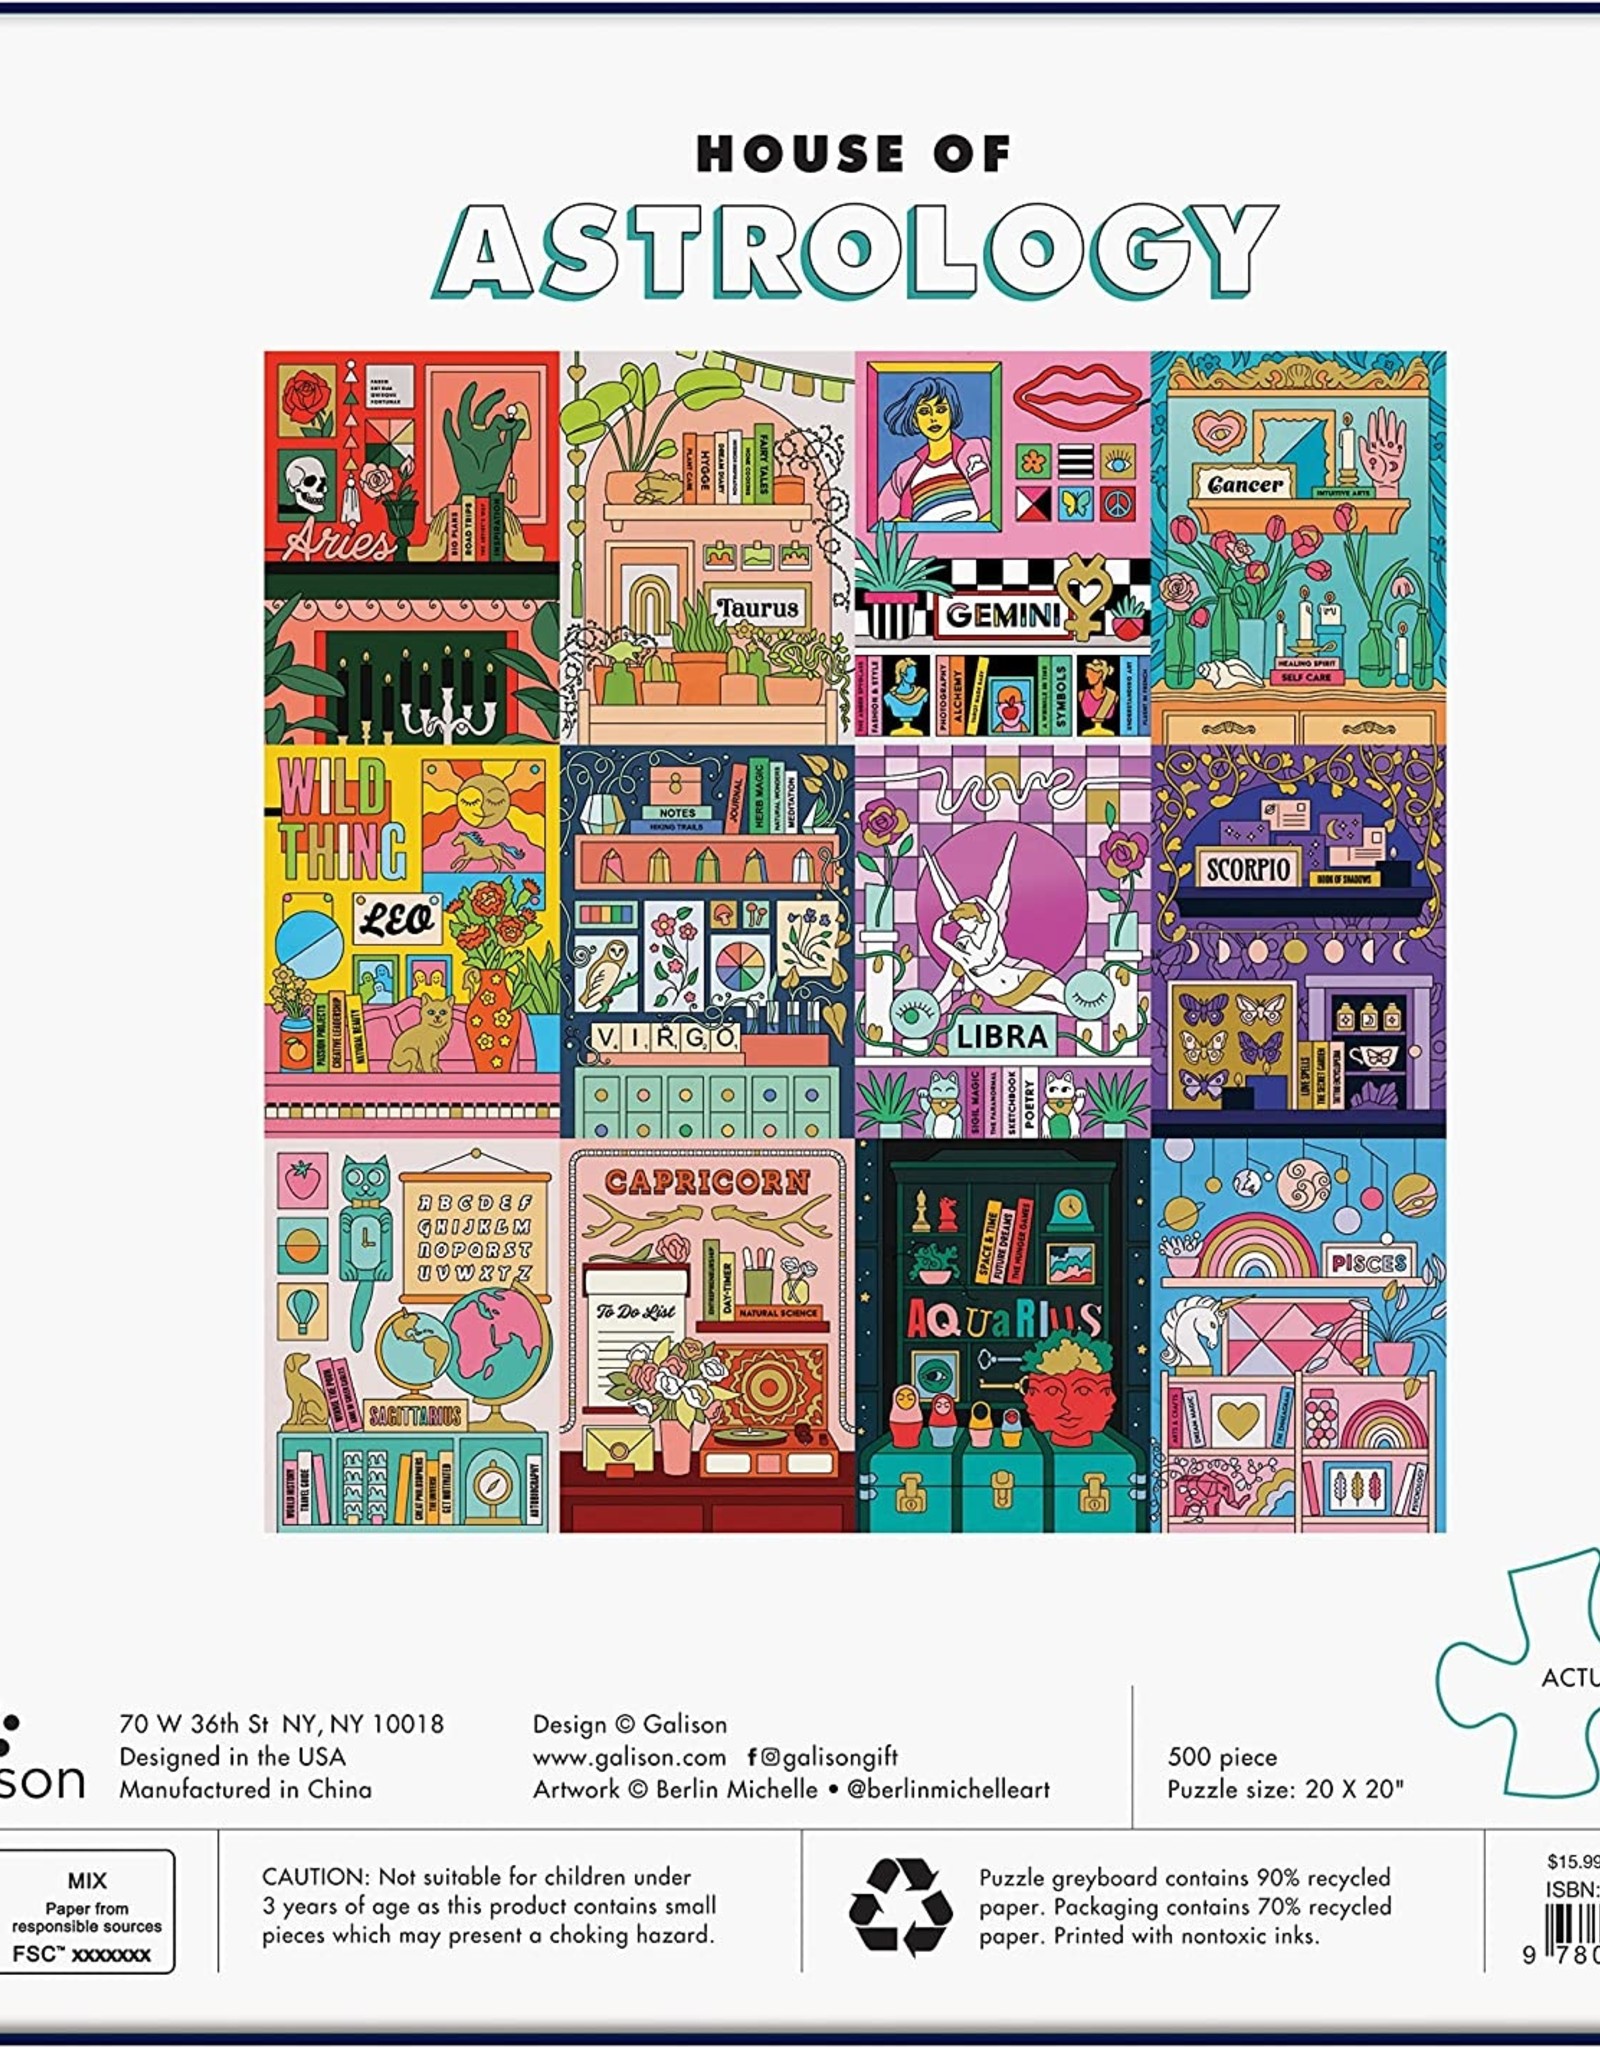 Chronicle Books Puzzle: House of Astrology (500 pc)